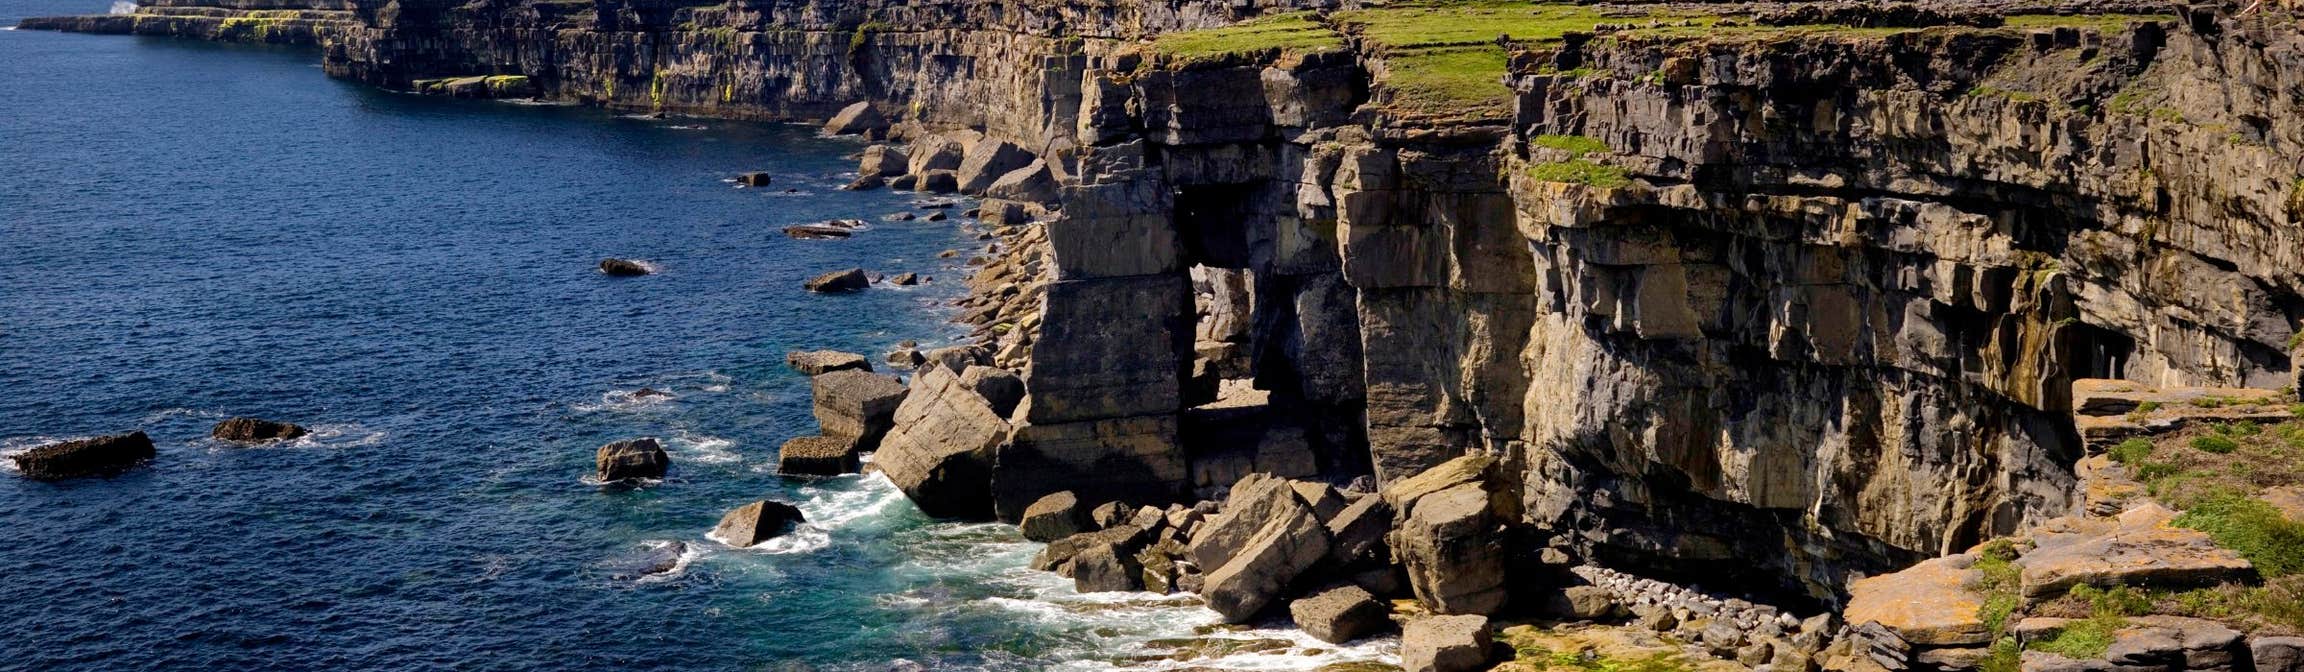 Image of Inishmore in the Aran Islands